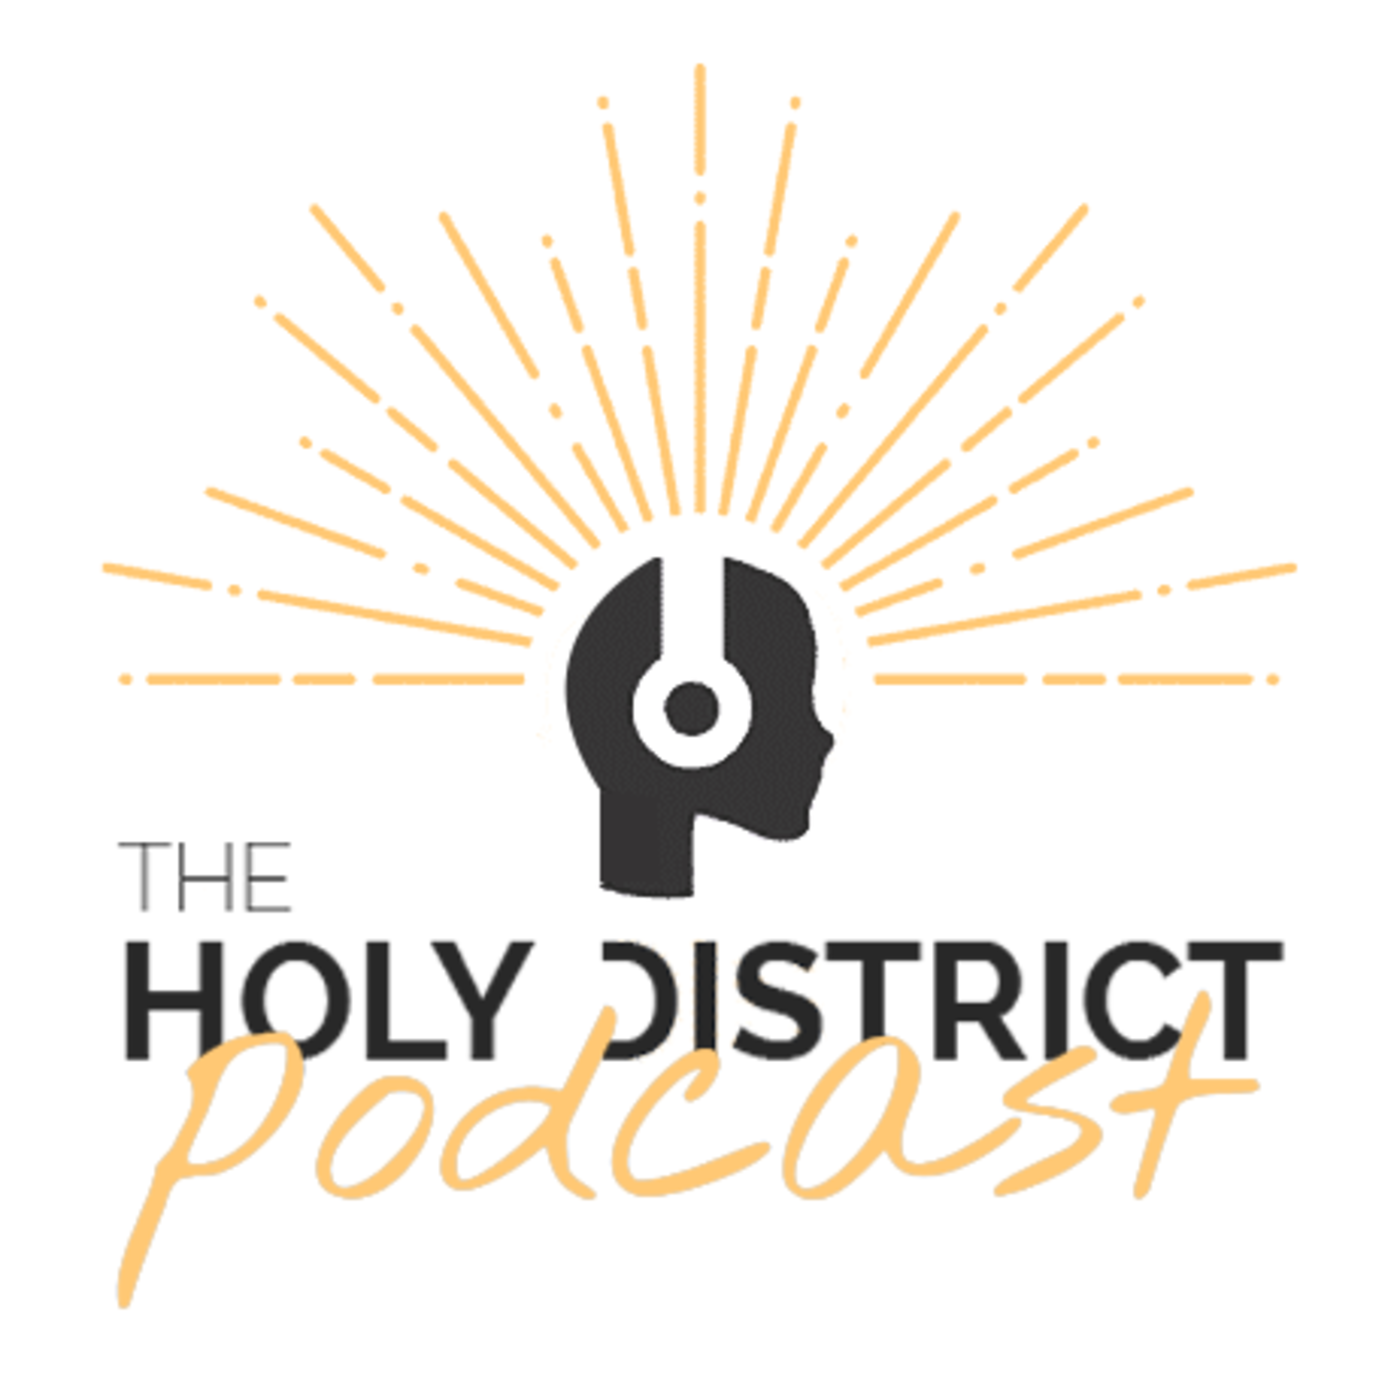 The Holy District Podcast